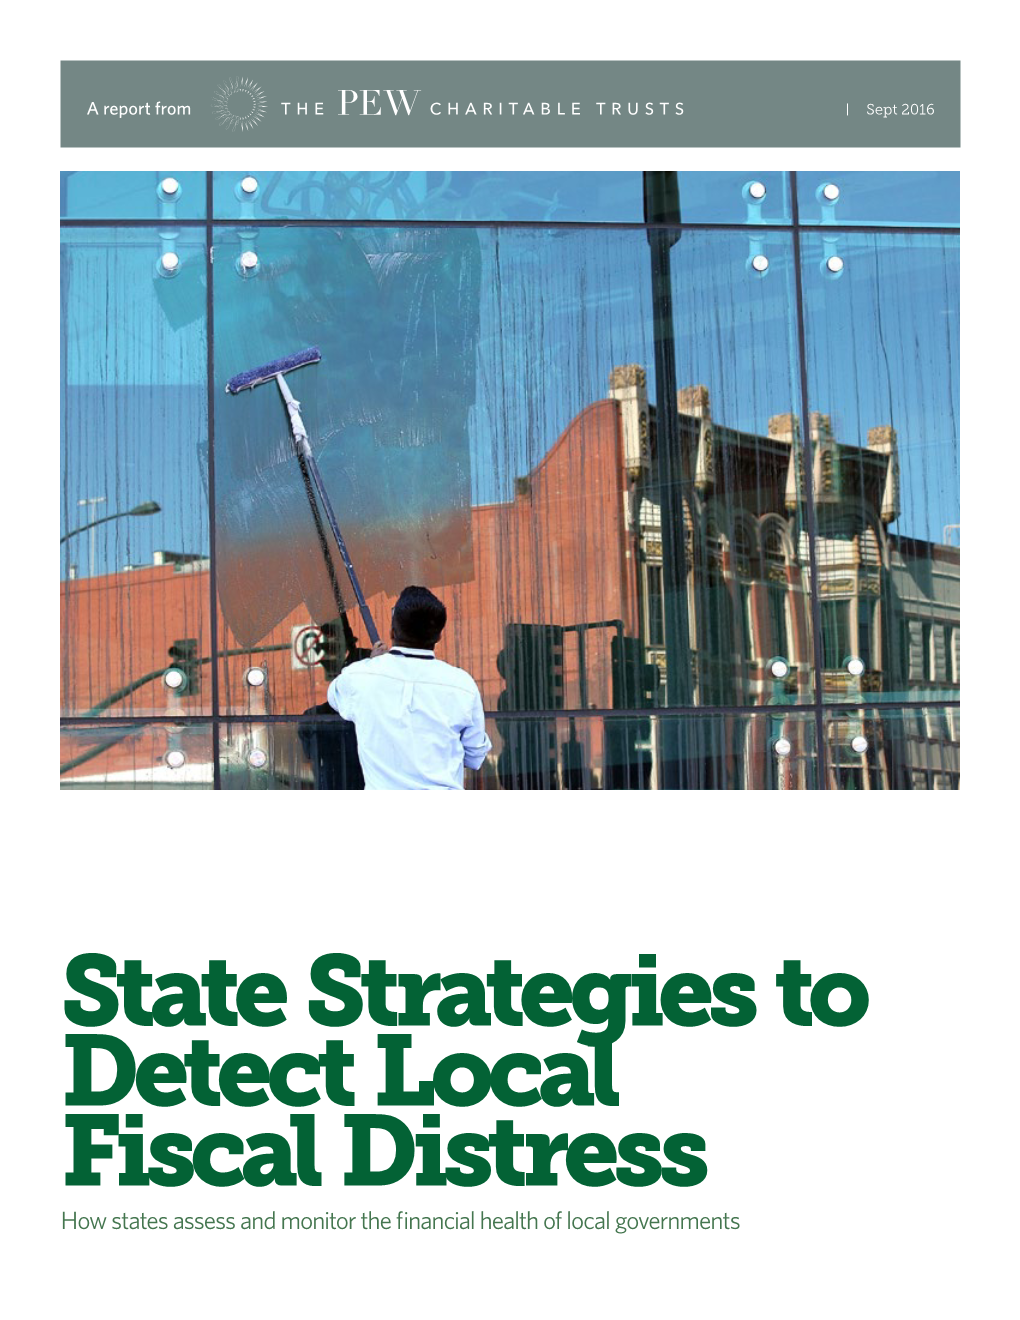 State Strategies to Detect Local Fiscal Distress How States Assess and Monitor the Financial Health of Local Governments